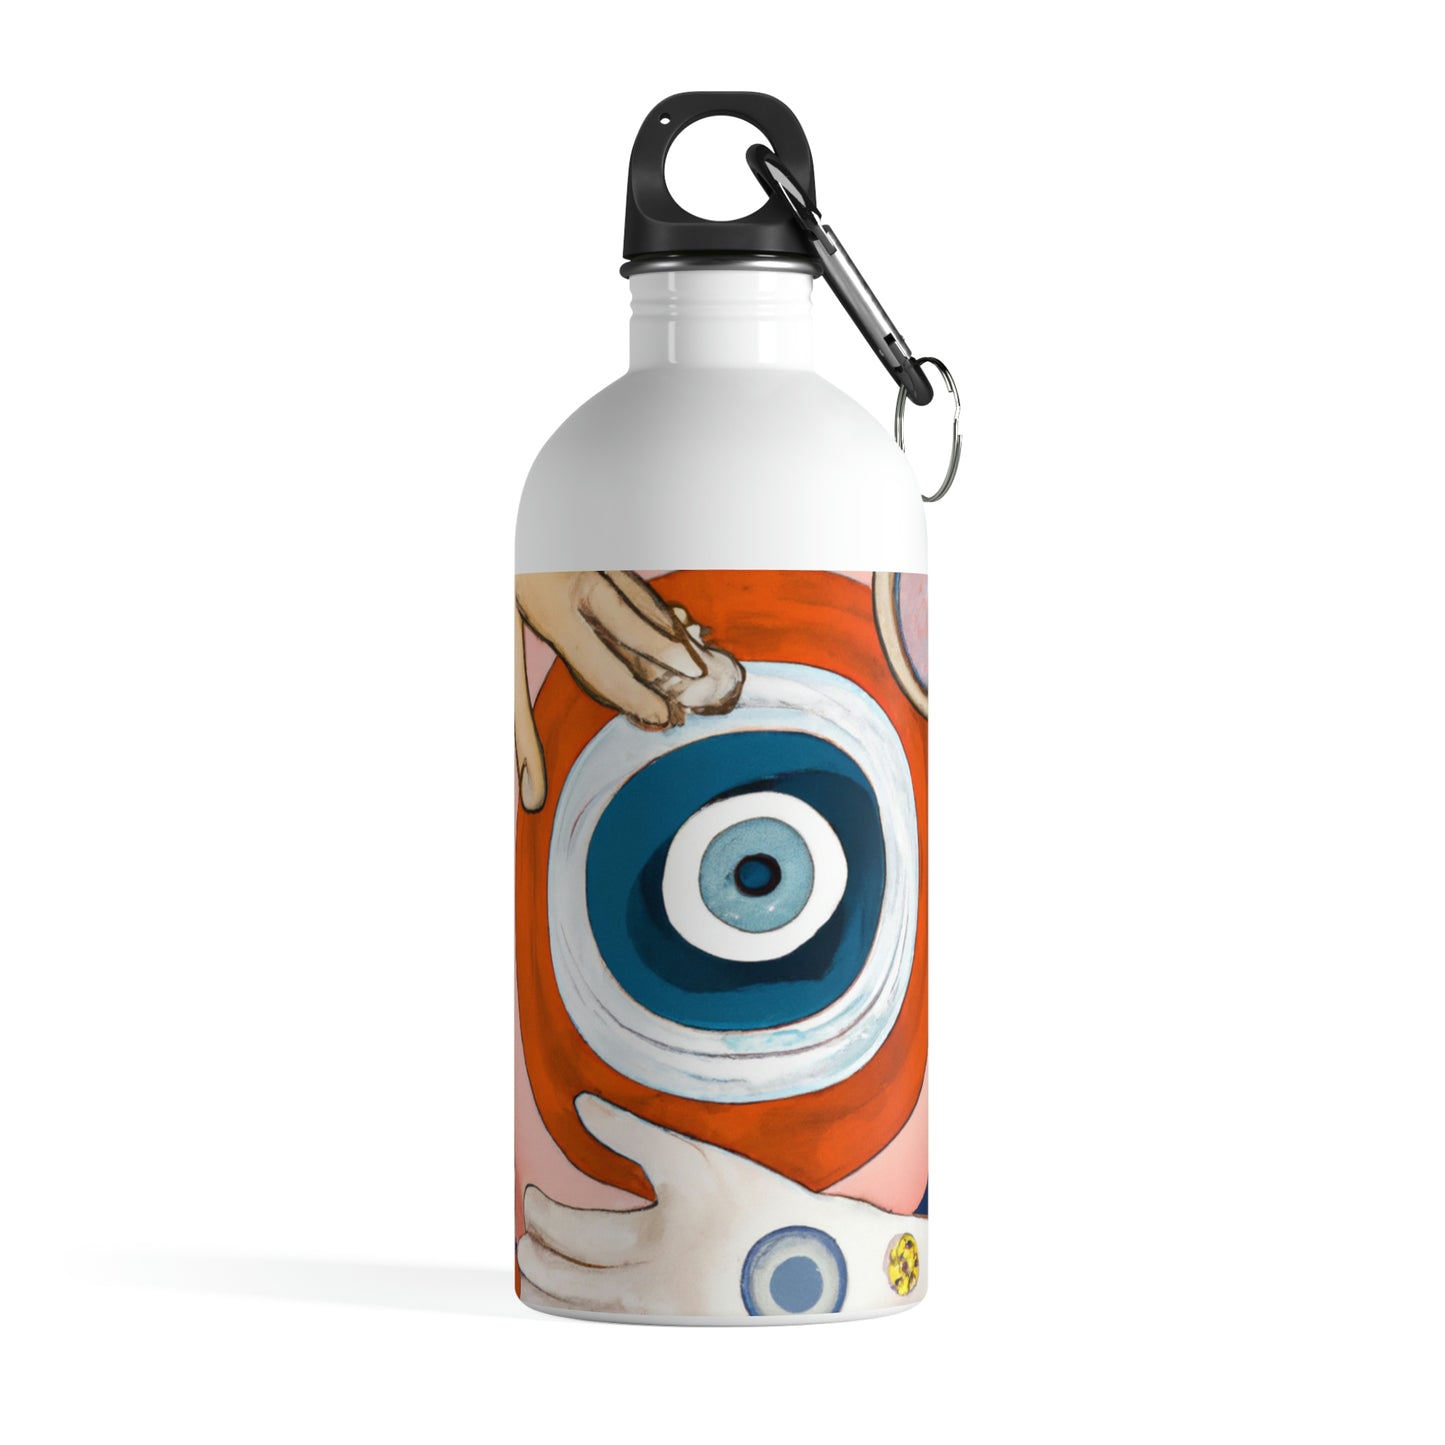 takes them on an adventure

A Twist of Magic: An Elderly Person's Unexpected Journey - The Alien Stainless Steel Water Bottle